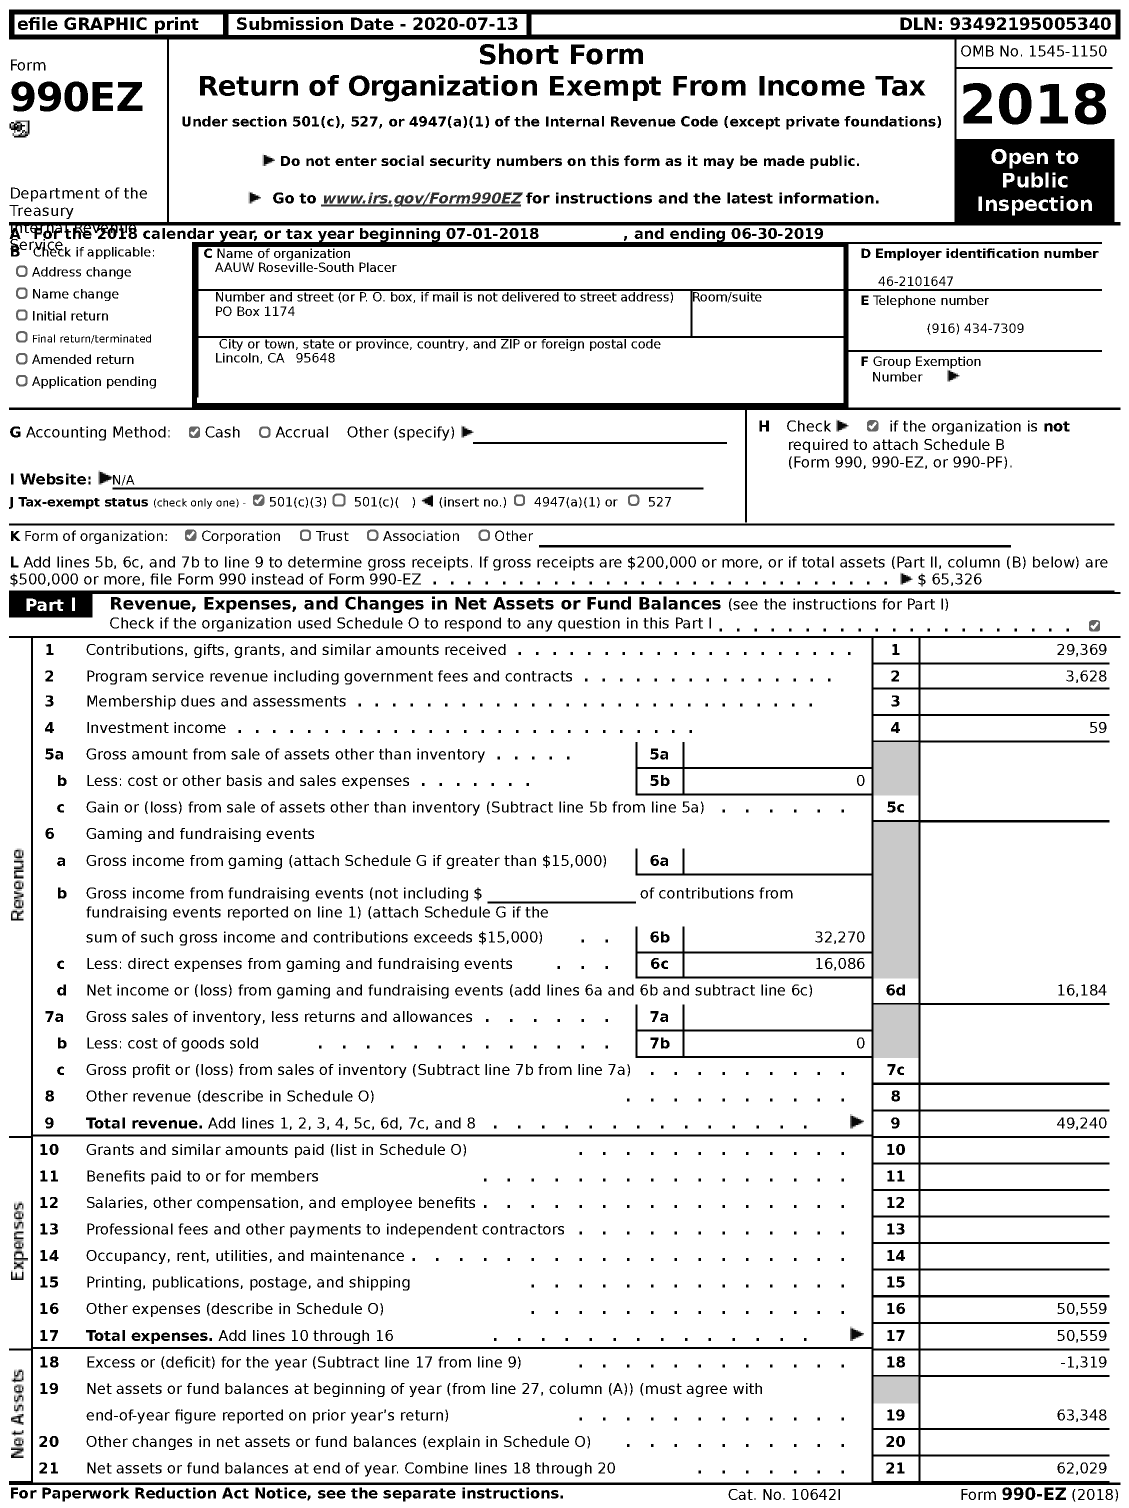 Image of first page of 2018 Form 990EZ for AAUW Roseville-South Placer